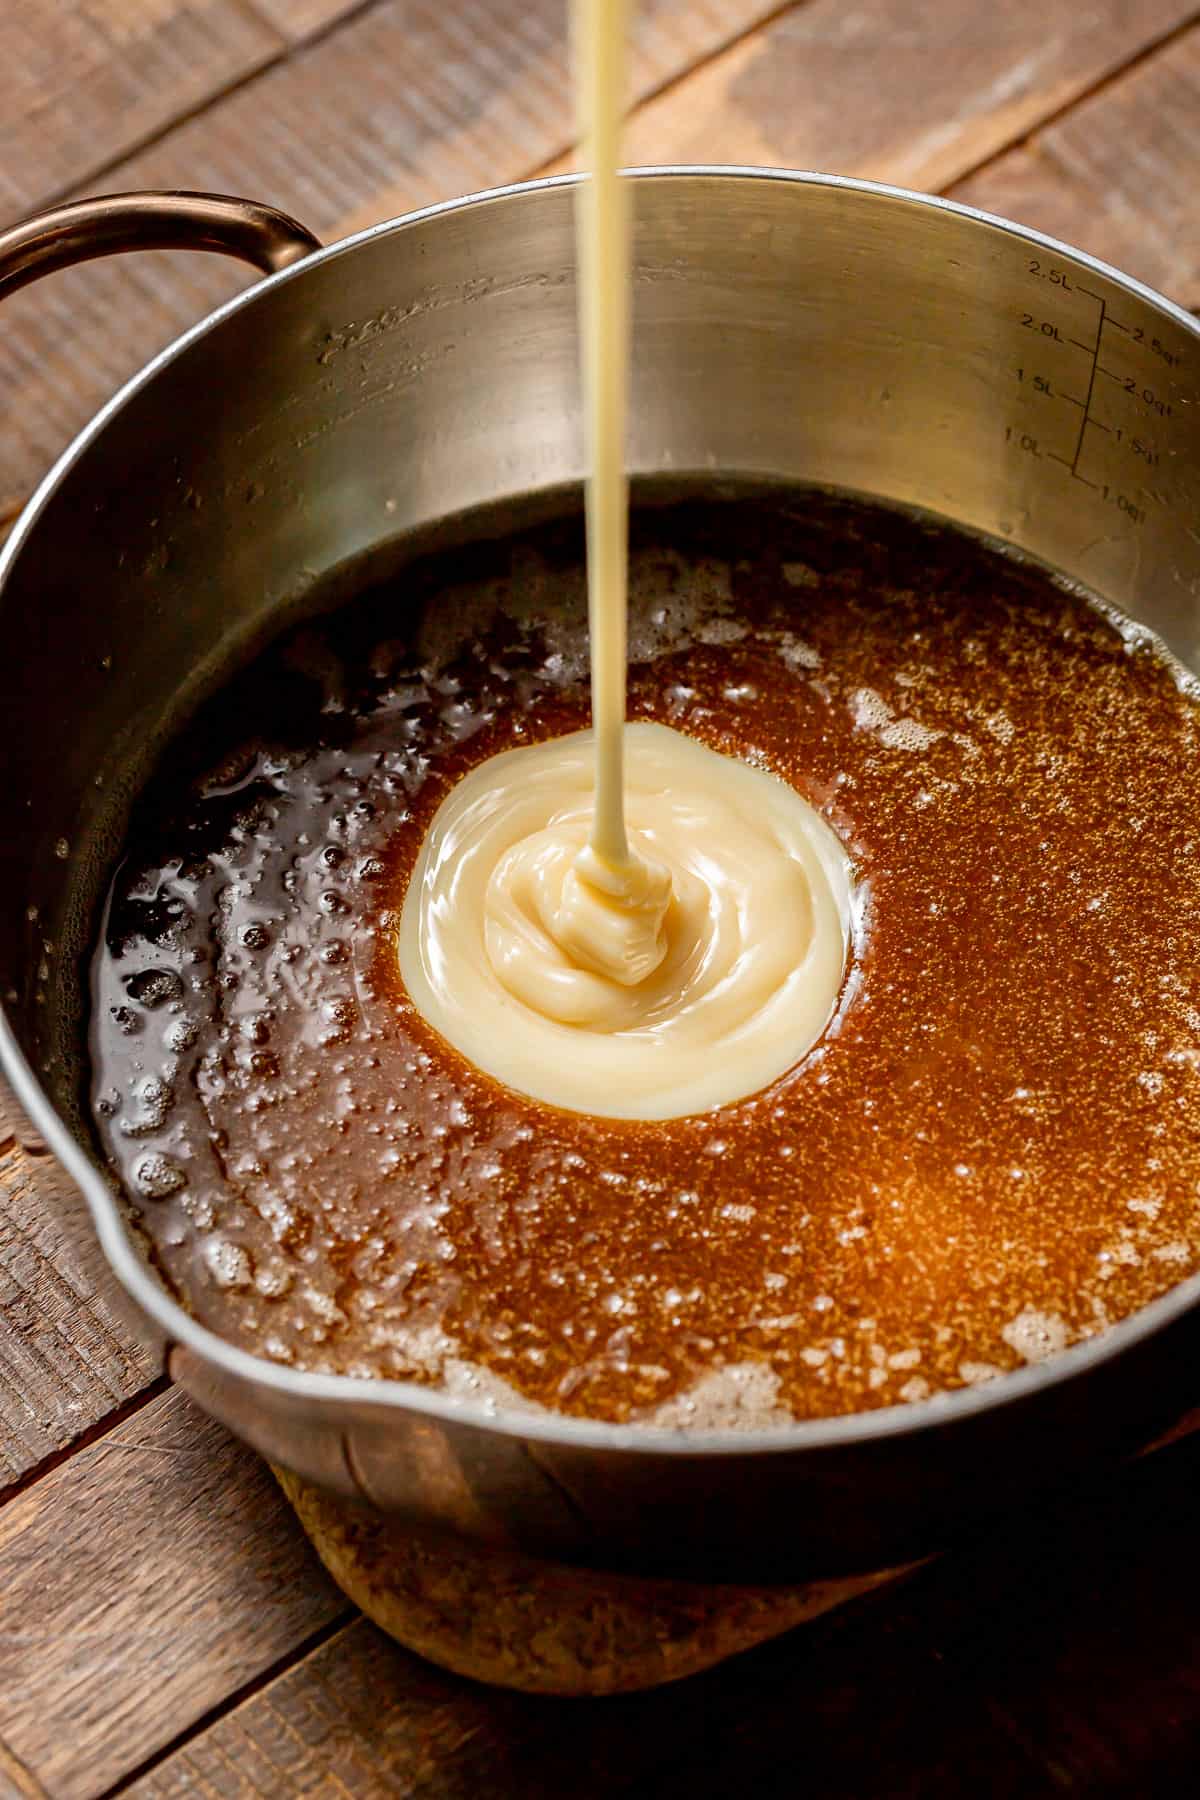 sweetened condensed milk added to caramel in sauce pot.